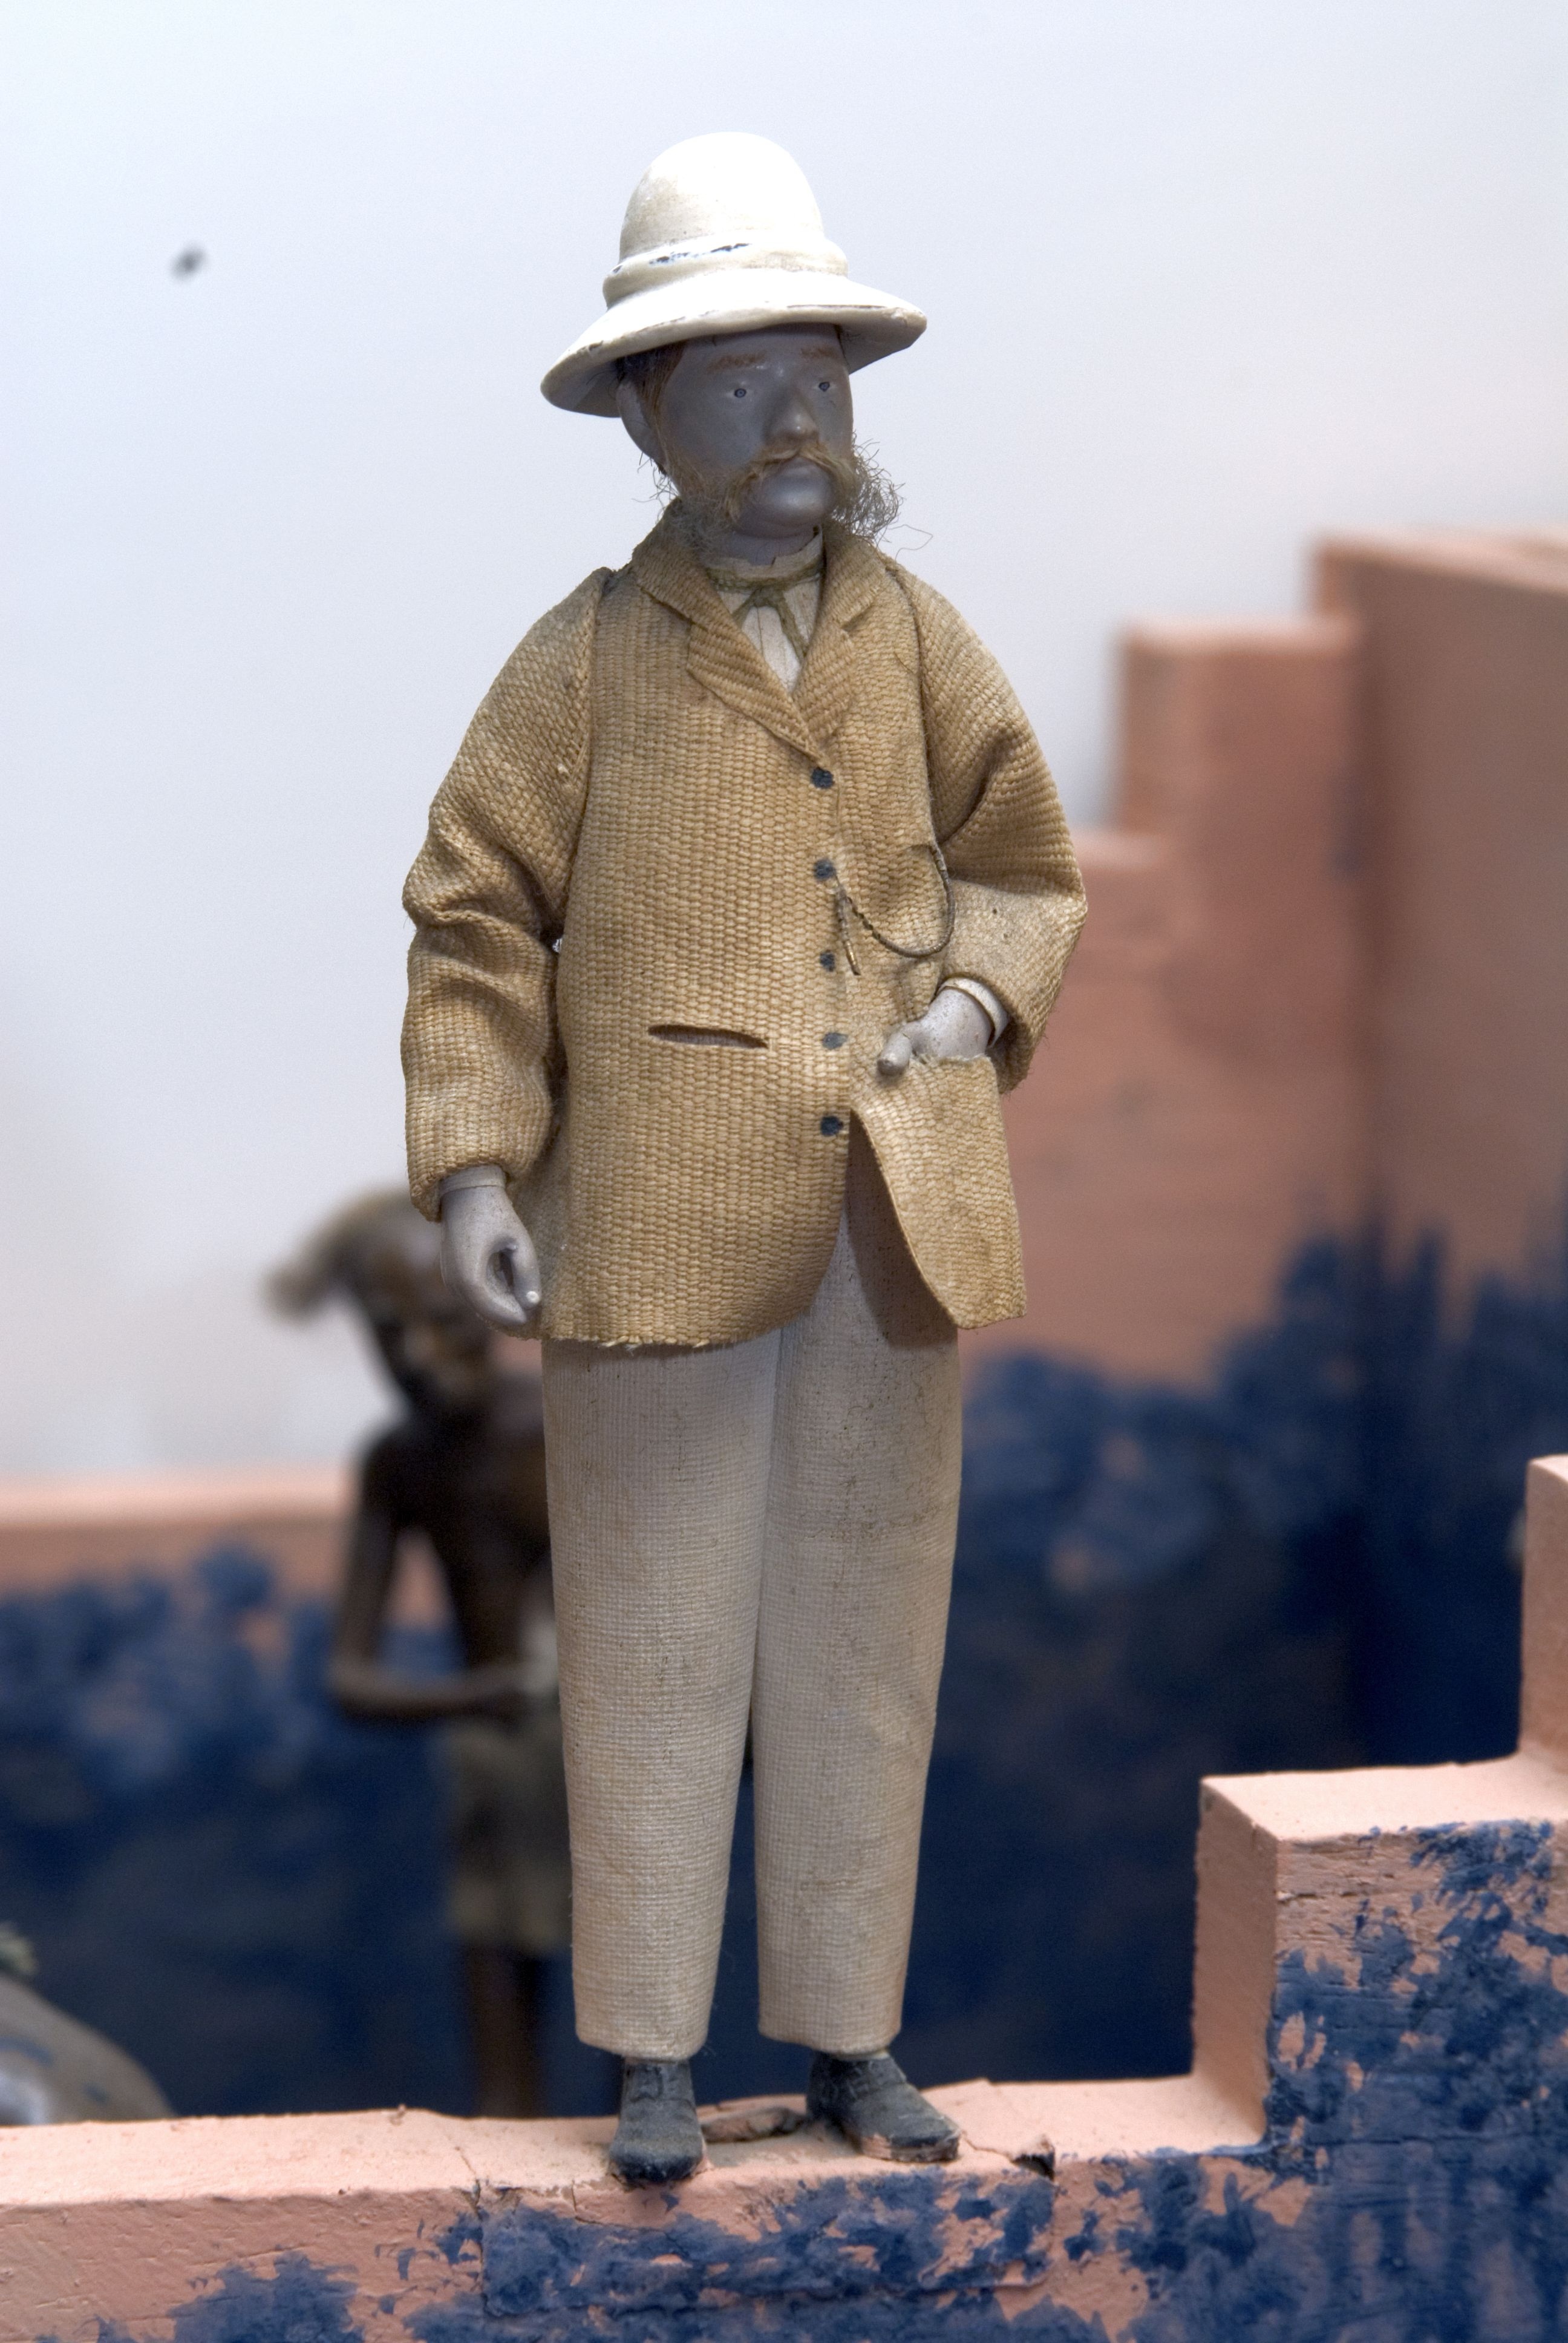 The figure of a European manager in pith helmet surveys the scene